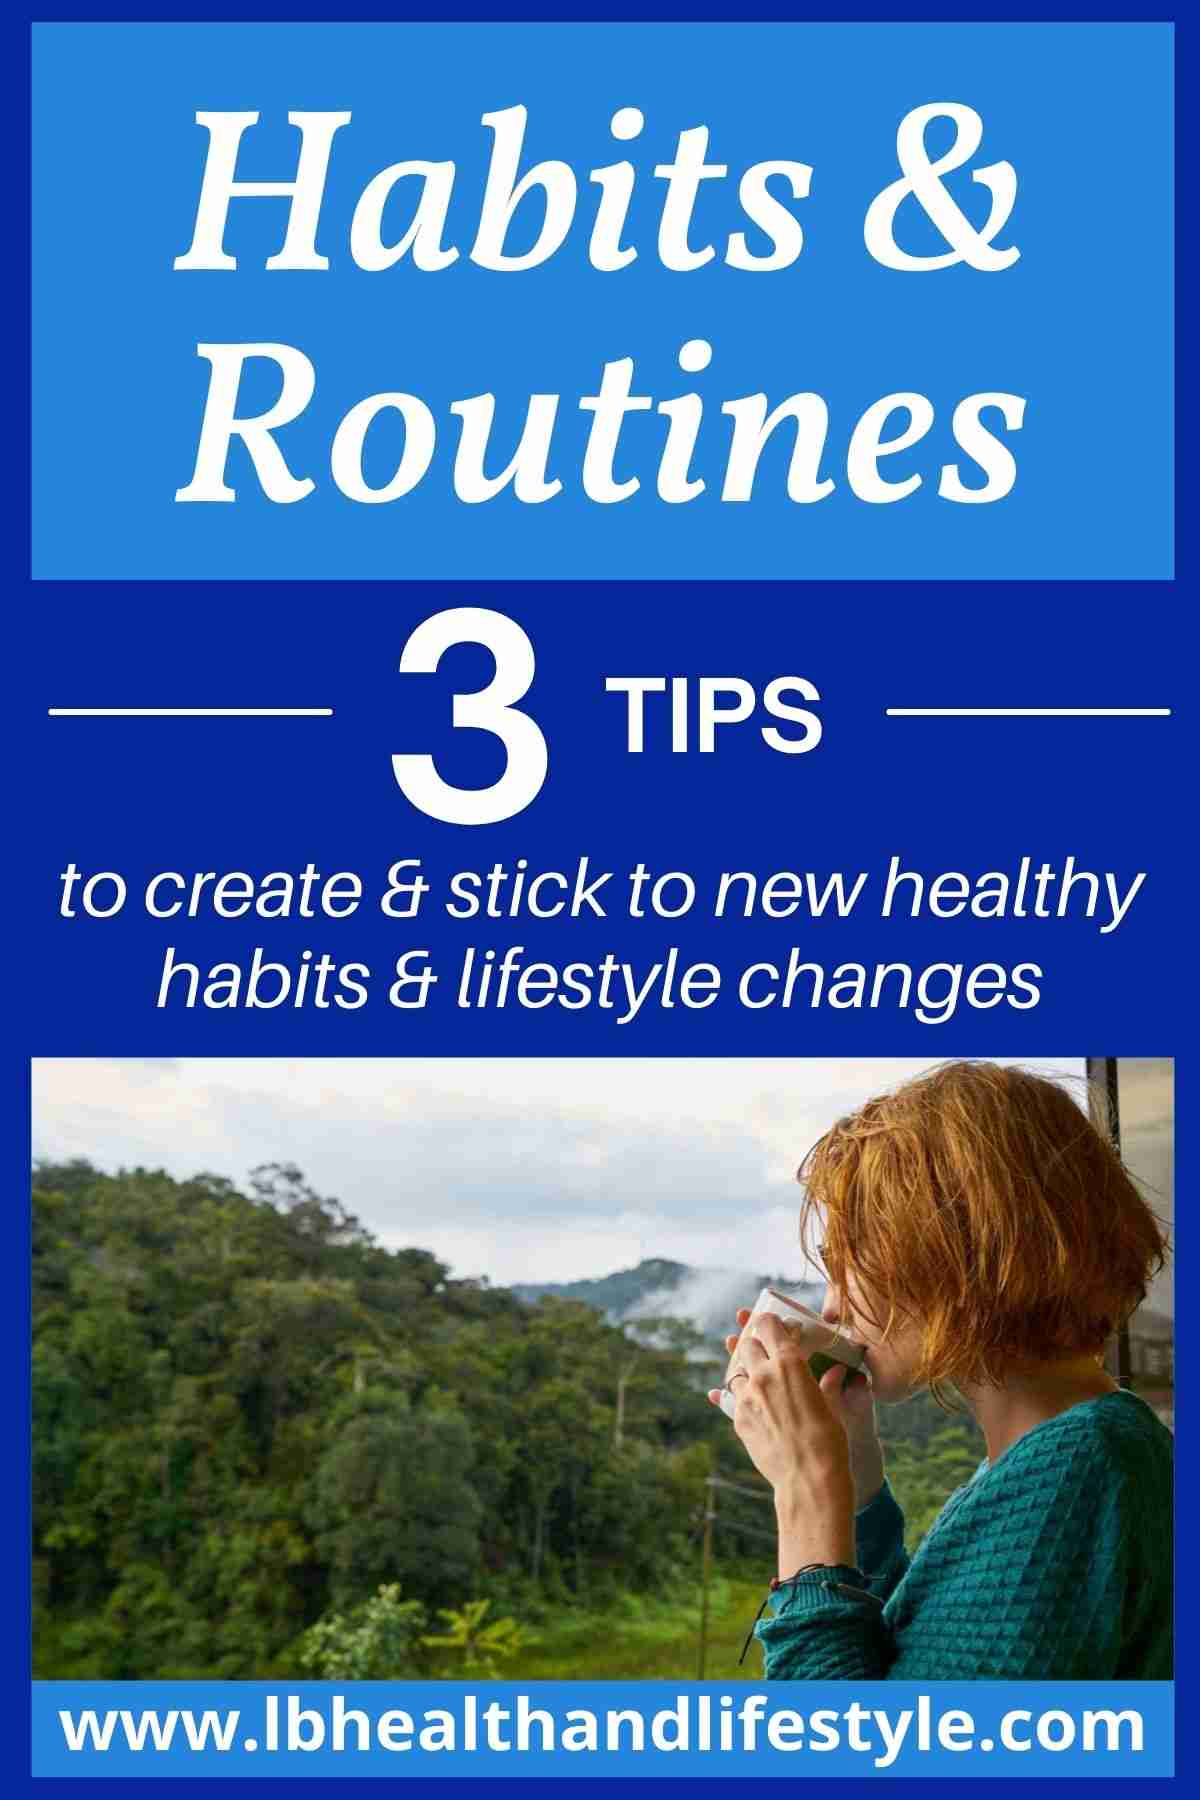 Habits And Routines – 3 Tips To Stick To New Ones